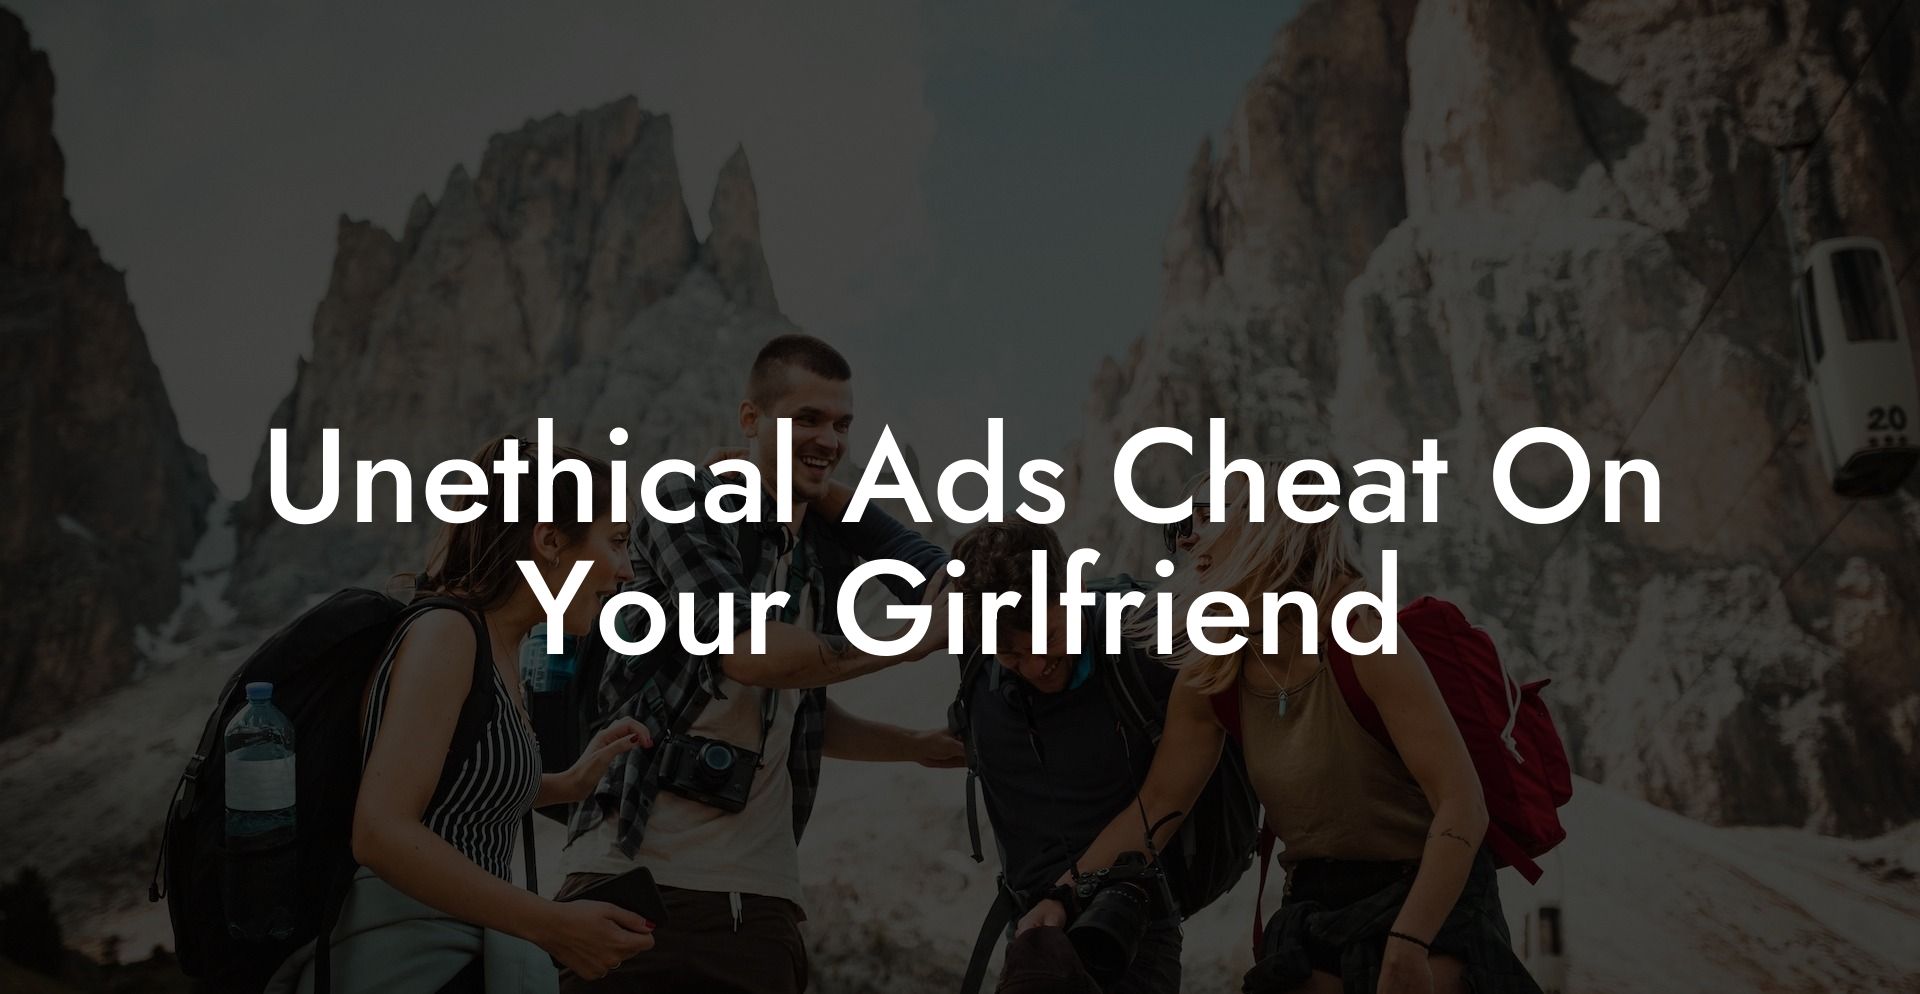 Unethical Ads Cheat On Your Girlfriend